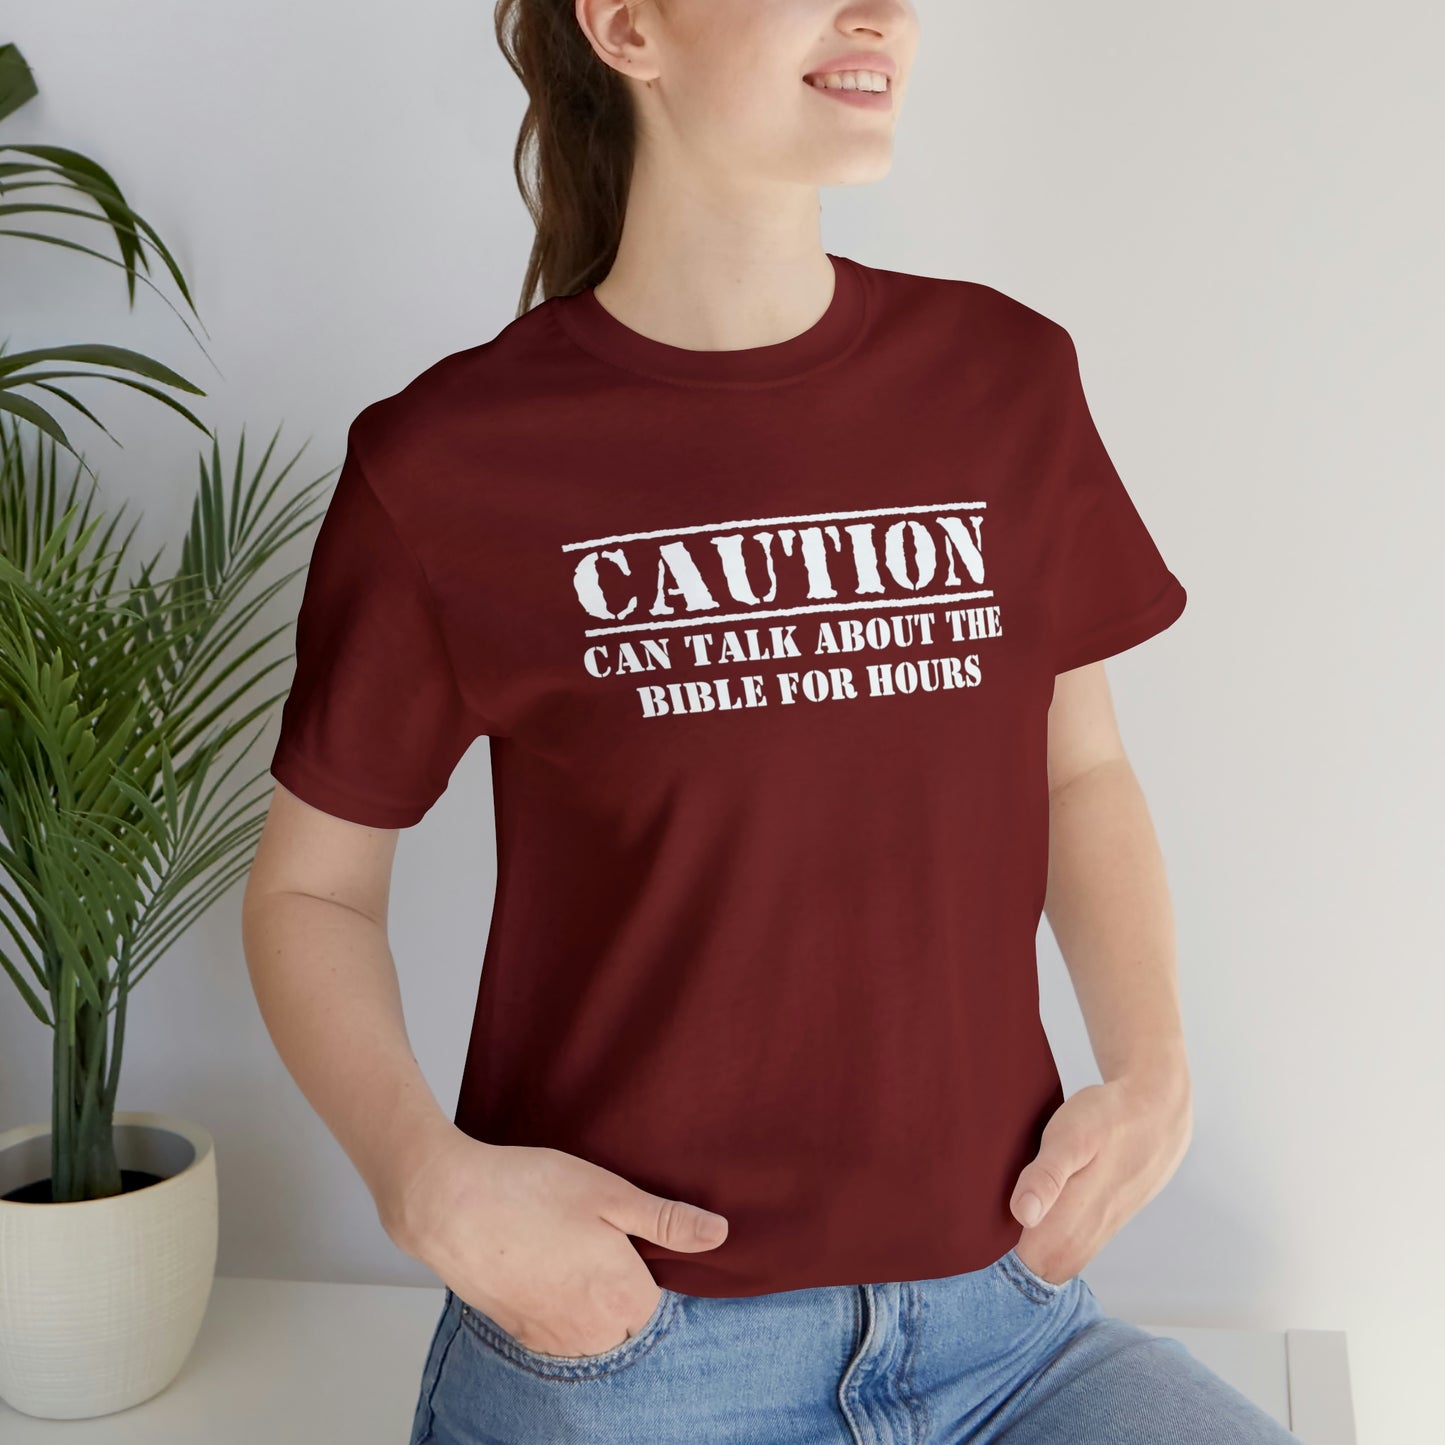 Caution Can Talk About the Bible for Hours Shirt